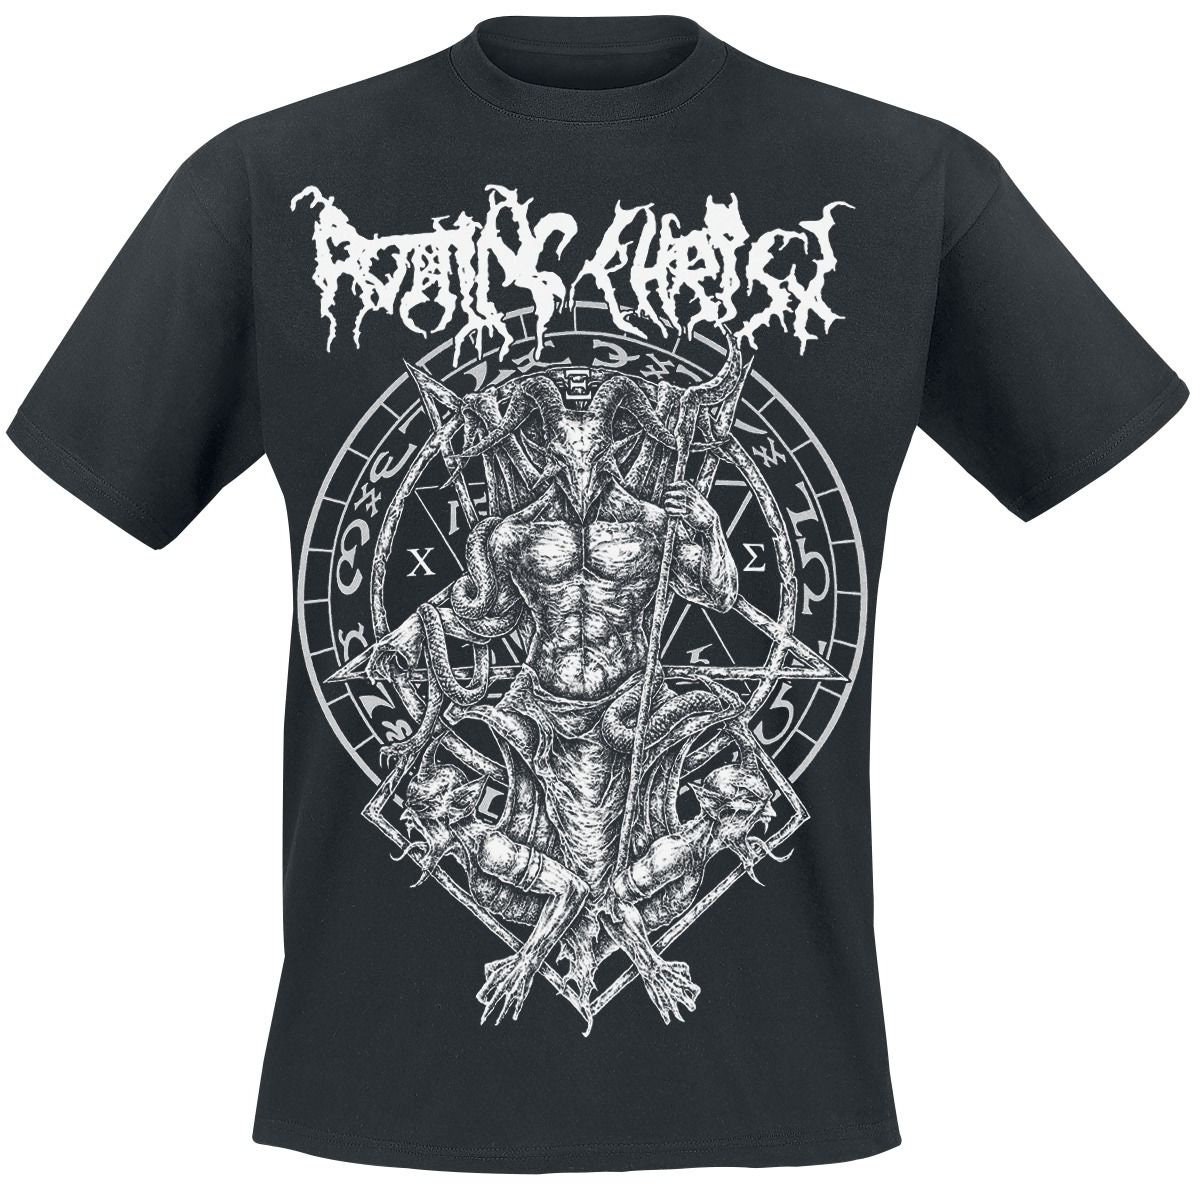 A Dead Poem SIZES:S to 5XL Black Short Sleeve T_shirt - Rotting Christ